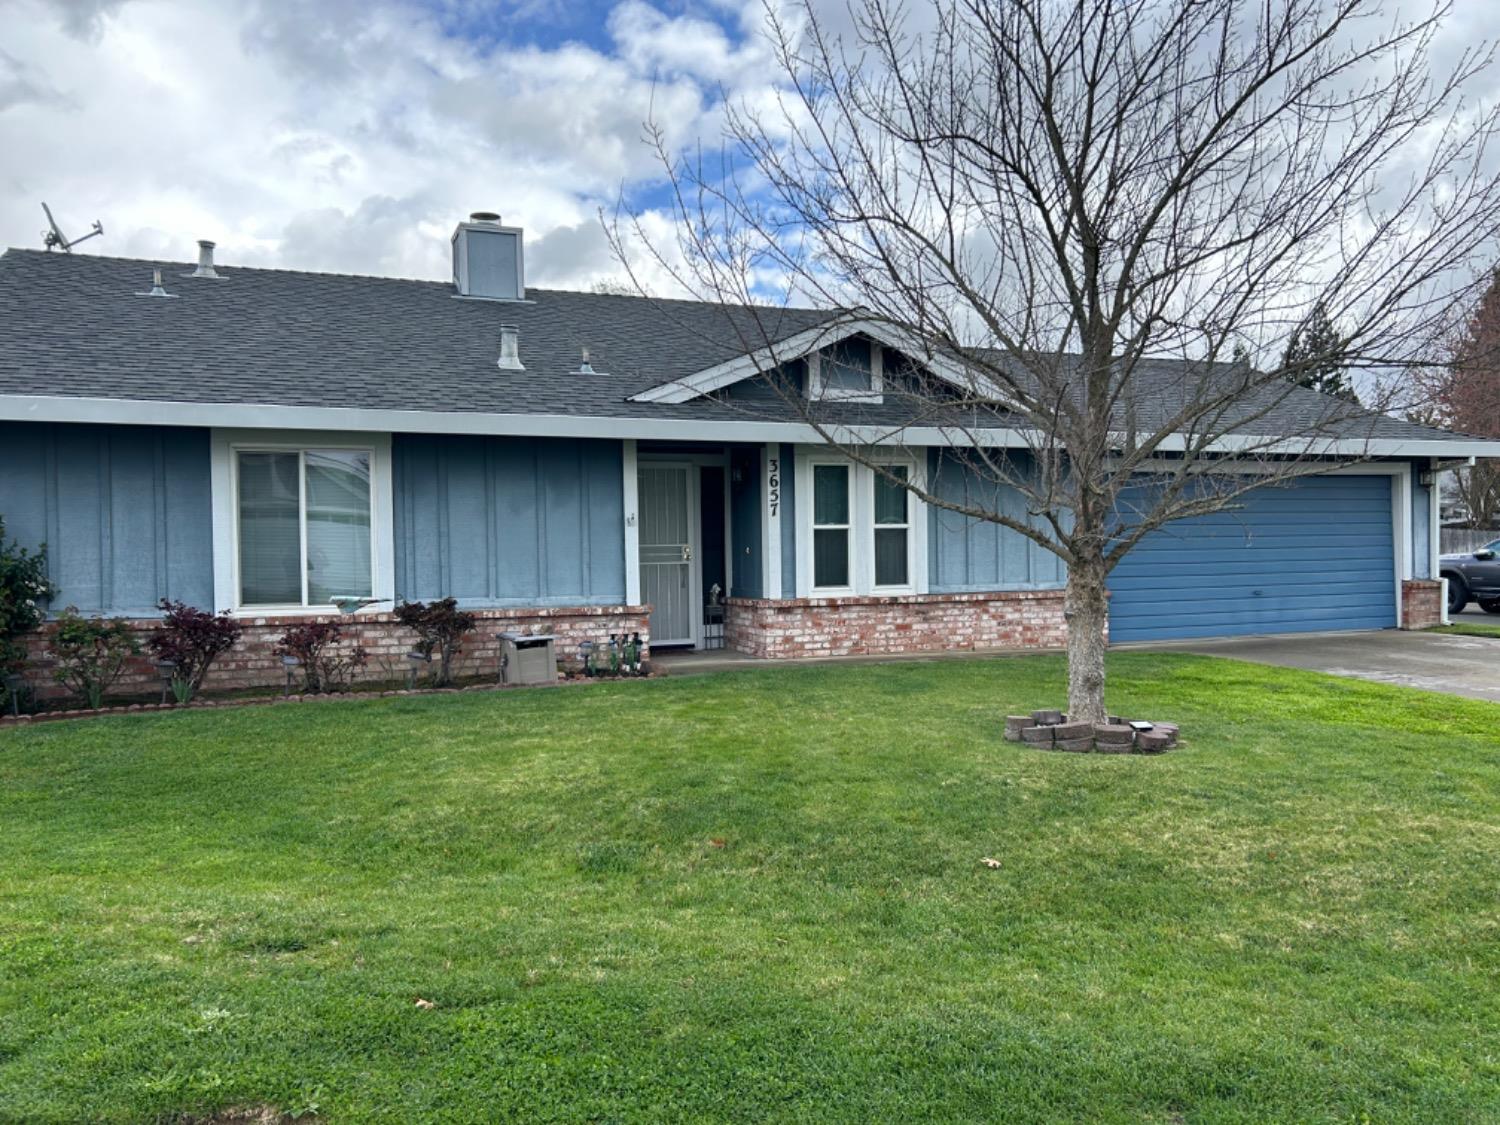 Photo of 3657 Rollins Wy in Antelope, CA